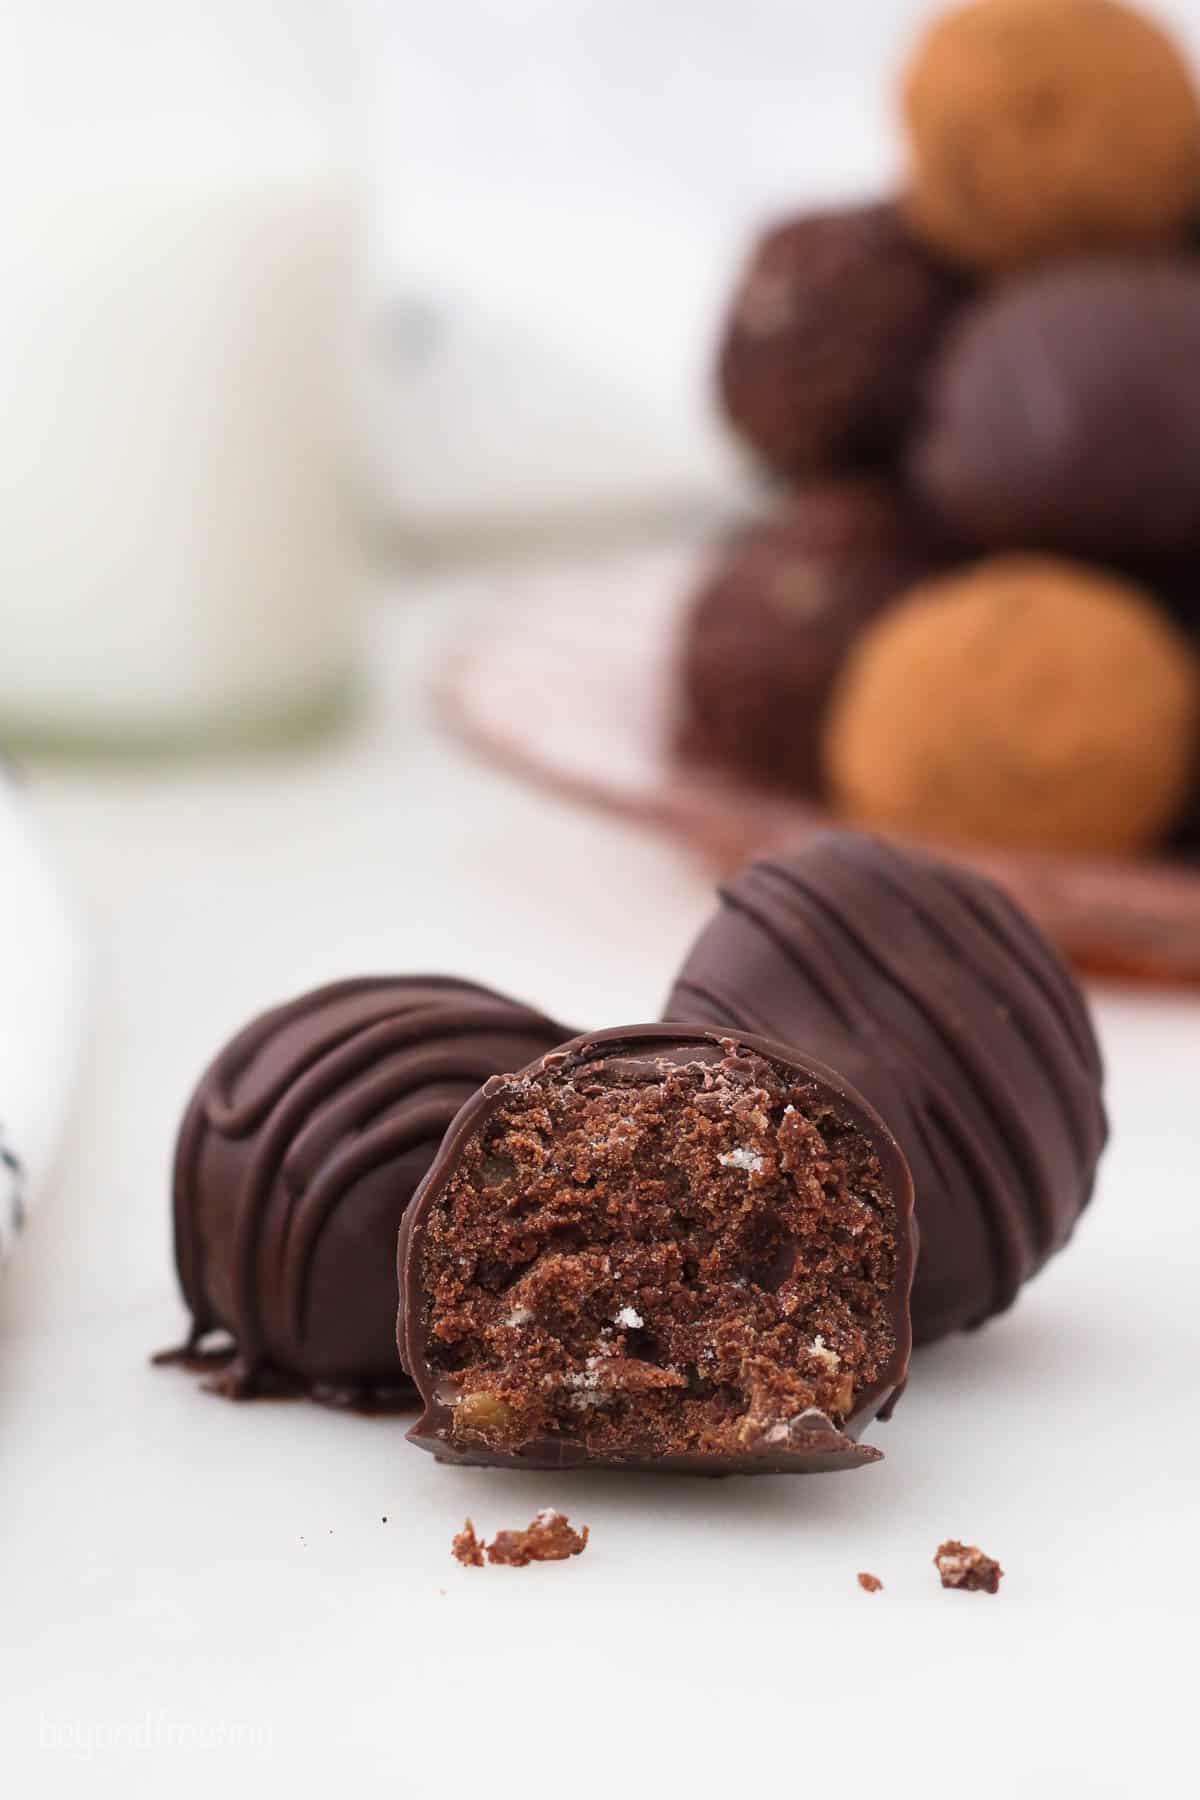 A chocolate rum ball broken in half on a countertop with a glass of milk in the background